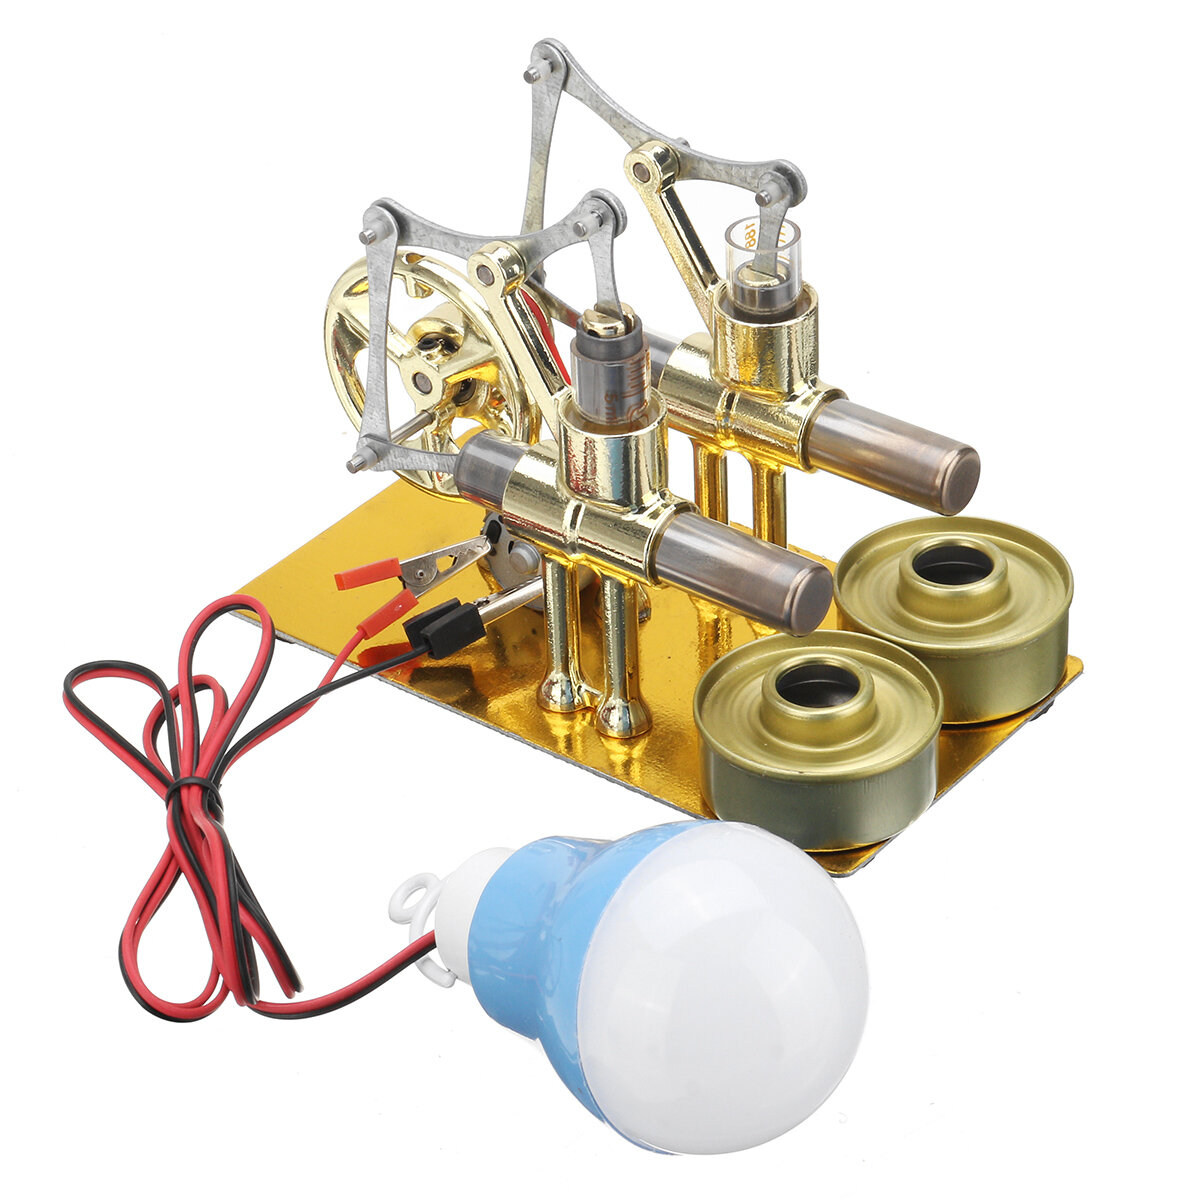 Double Cylinders Mini Hot Air Stirling Engine Model Generator Motor Steam Power 